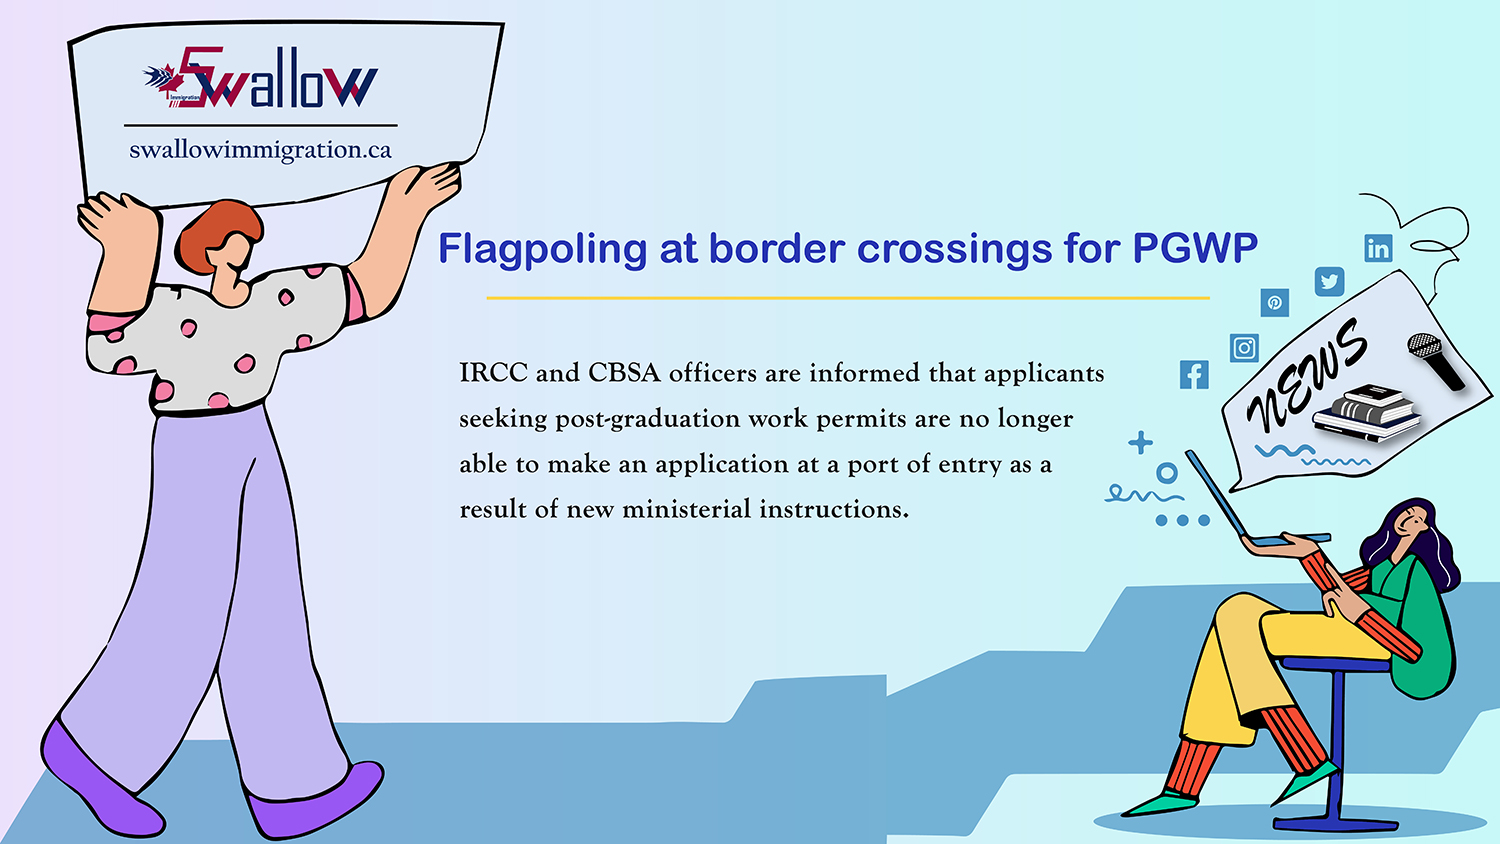 Flagpoling at border crossings for PGWP